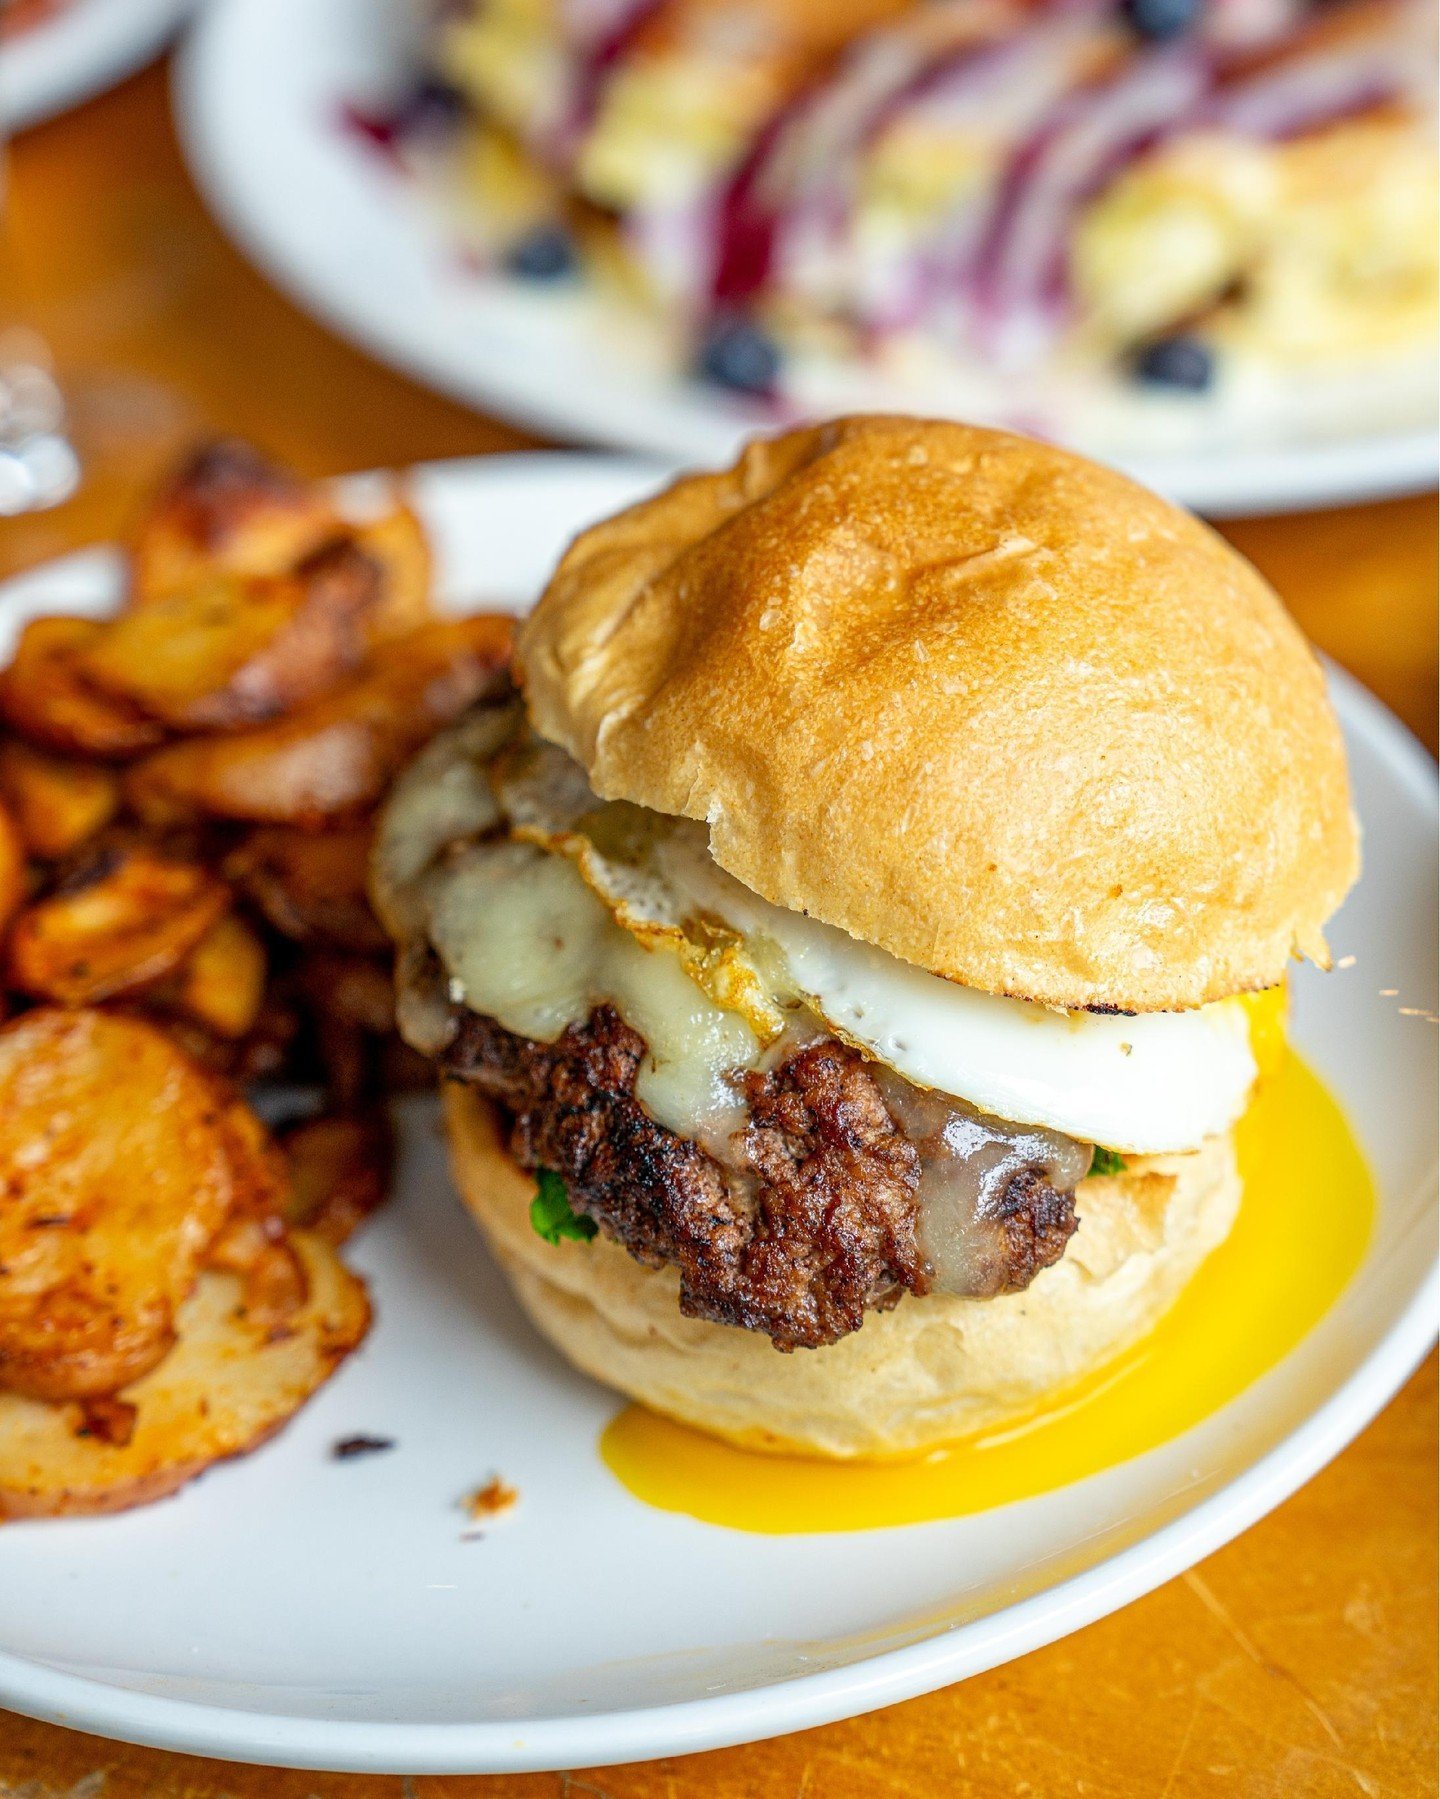 Comment below if you're a savory or sweet breakfast person⁉️

🍔 Brunch Burger: double smashed hereford beef, sunny side up egg, cheddar, rooster mayo, lettuce, tomato, onion, on a house made beer bun

🍌 Banana Nut French Toast: brul&eacute;ed banan